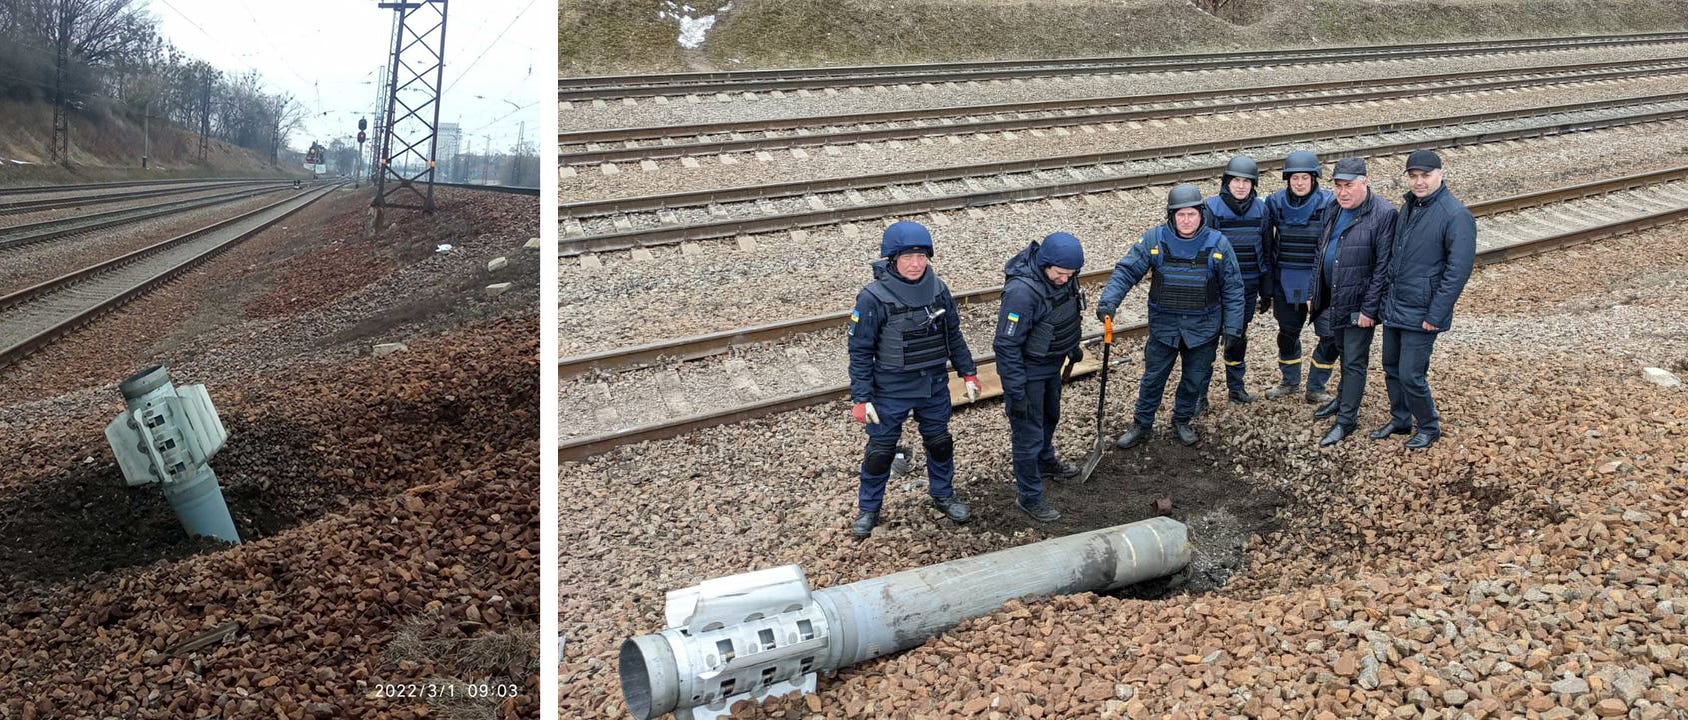 An unexploded munition is seen next to a train track with nothing else around.